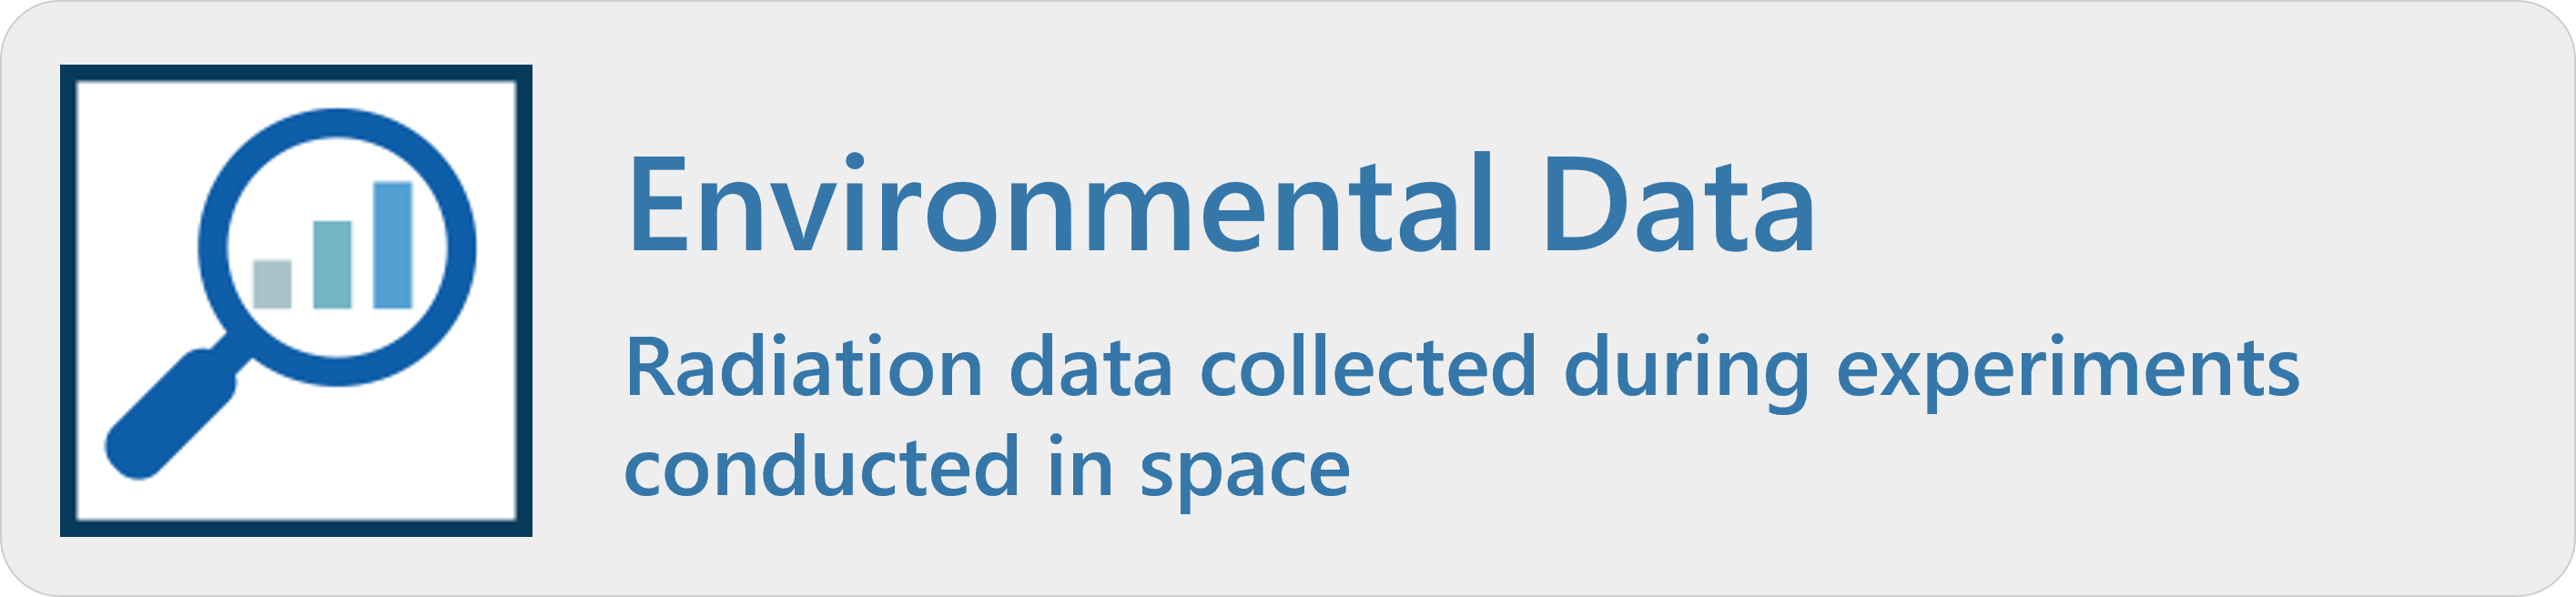 Environmental Data - Radiation data collected during experiments conducted in space